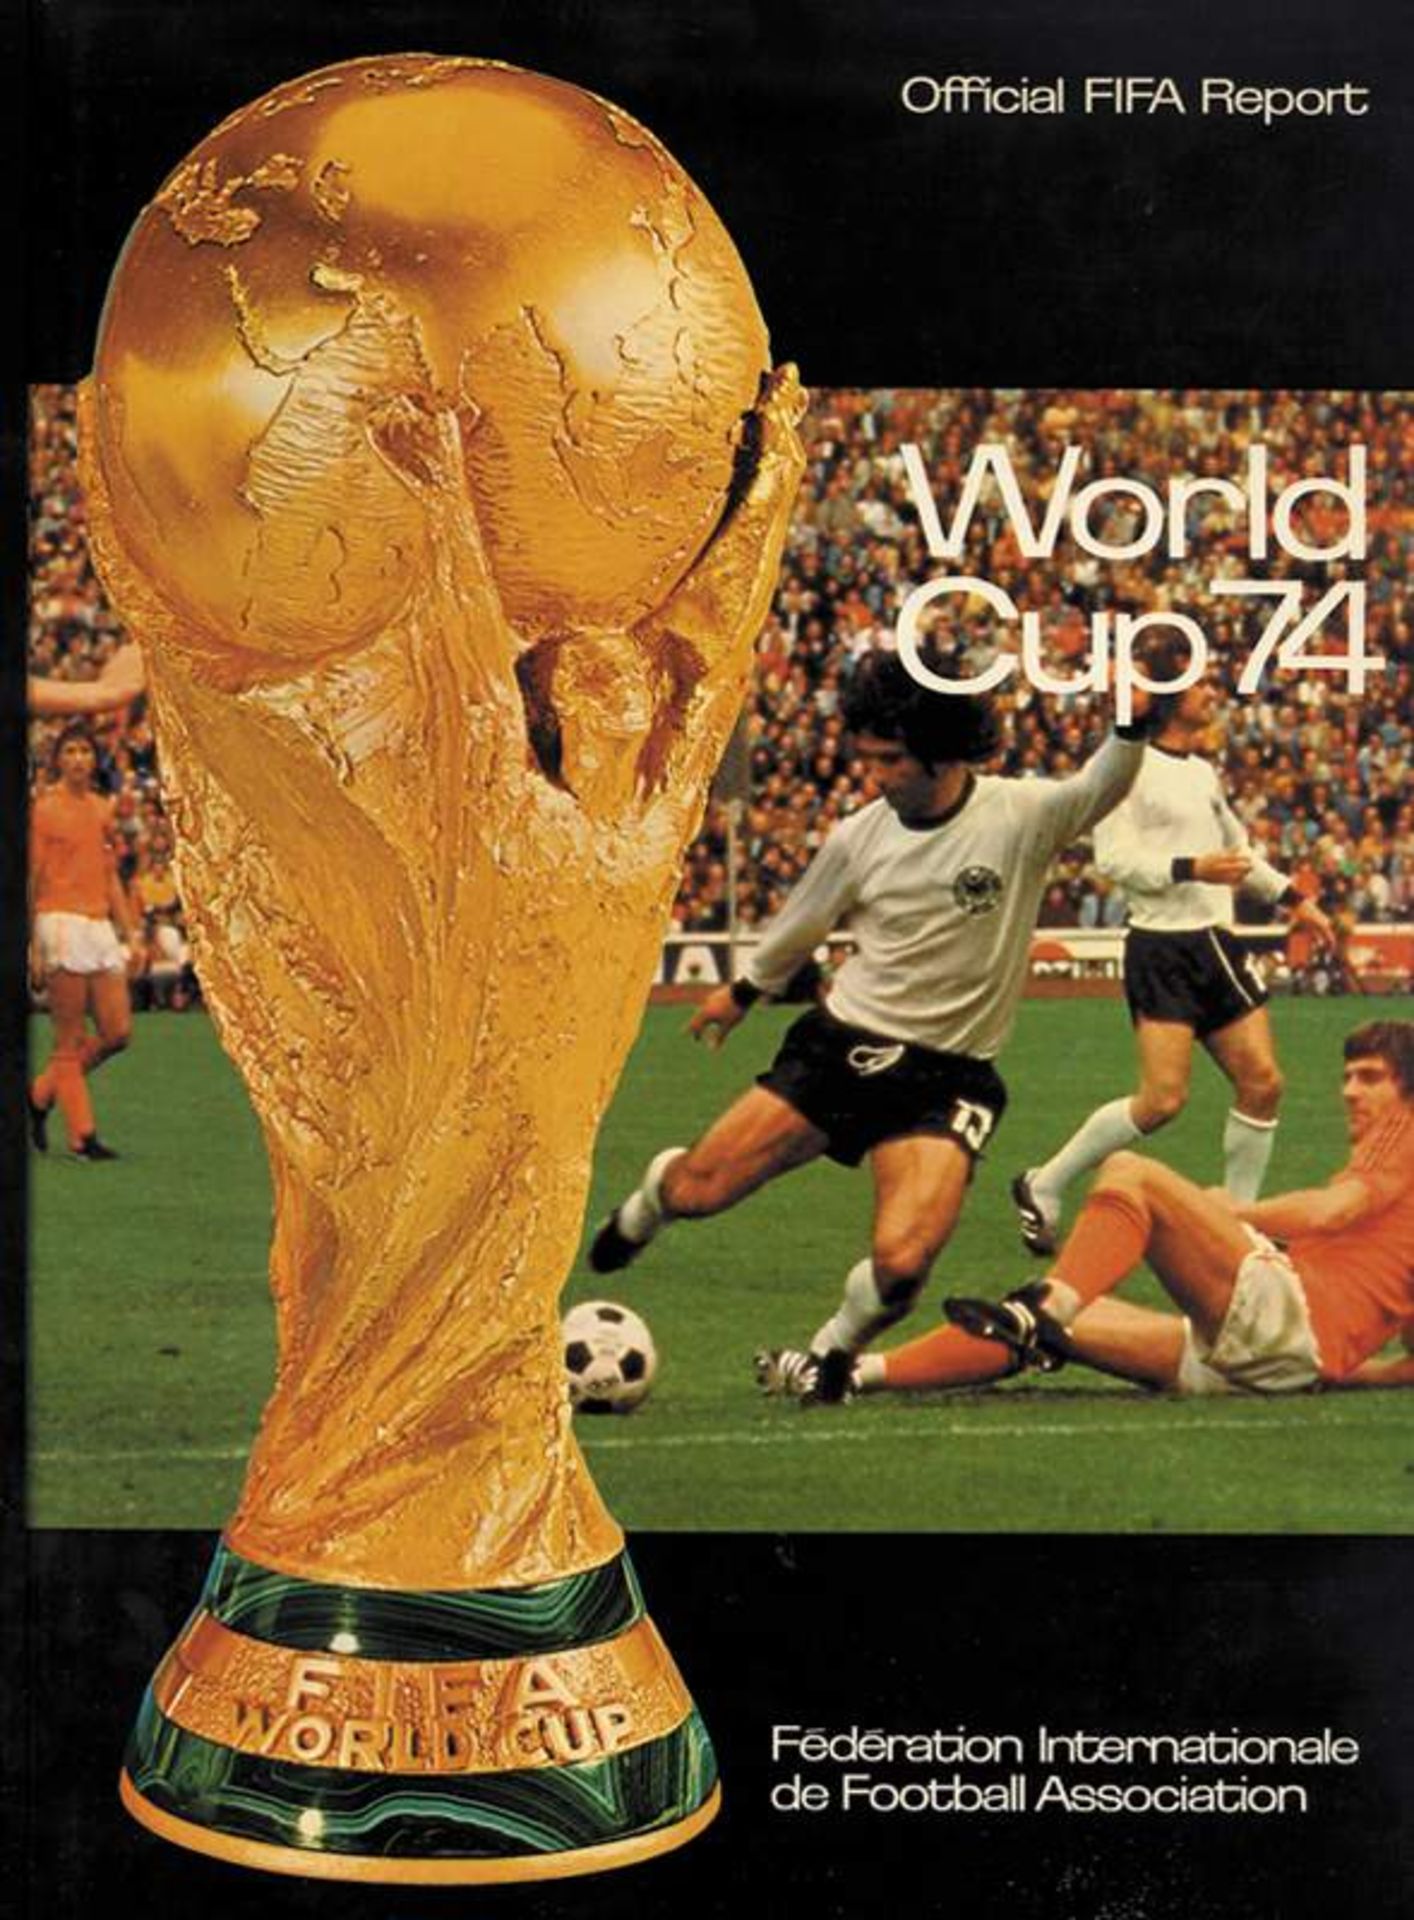 World Cup 1974. Official FIFA-Report - World Cup 1974. Official FIFA-Report. German edition. Very